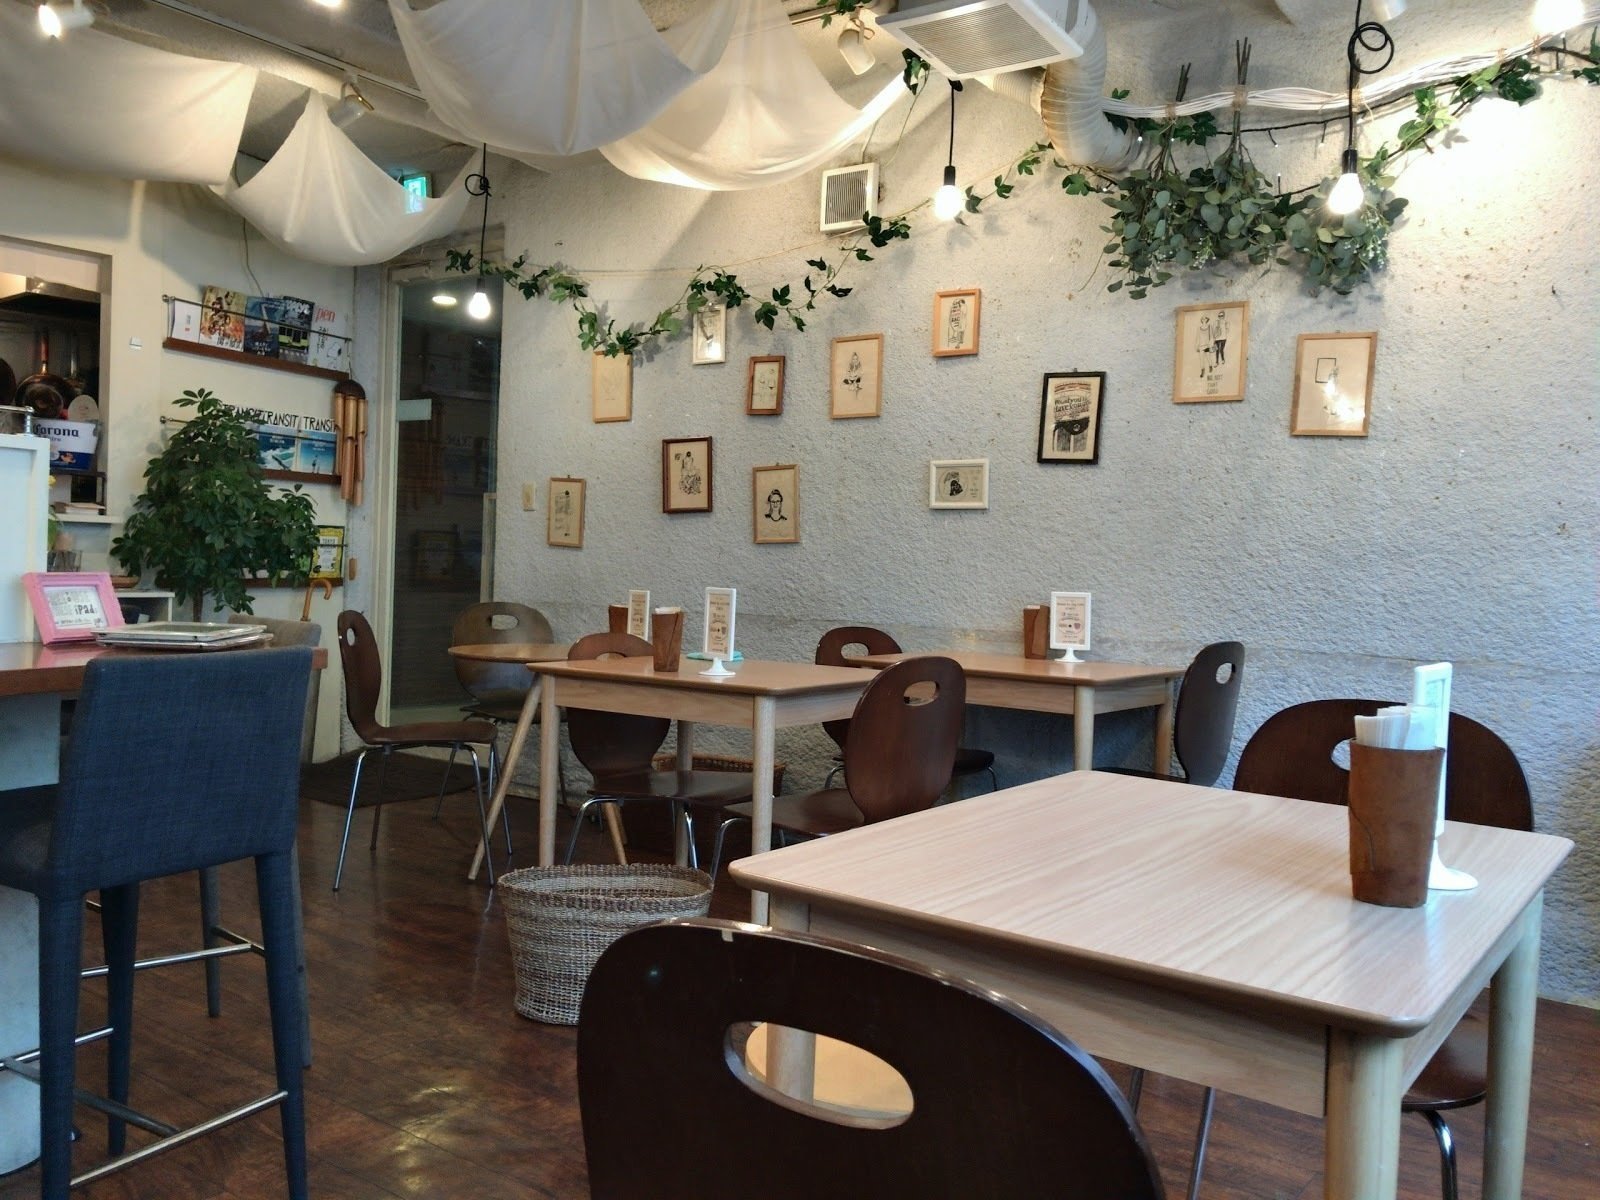 <span class="translation_missing" title="translation missing: en.meta.location_title, location_name: Shimokitazawa Tag Cafe, city: Tokyo">Location Title</span>